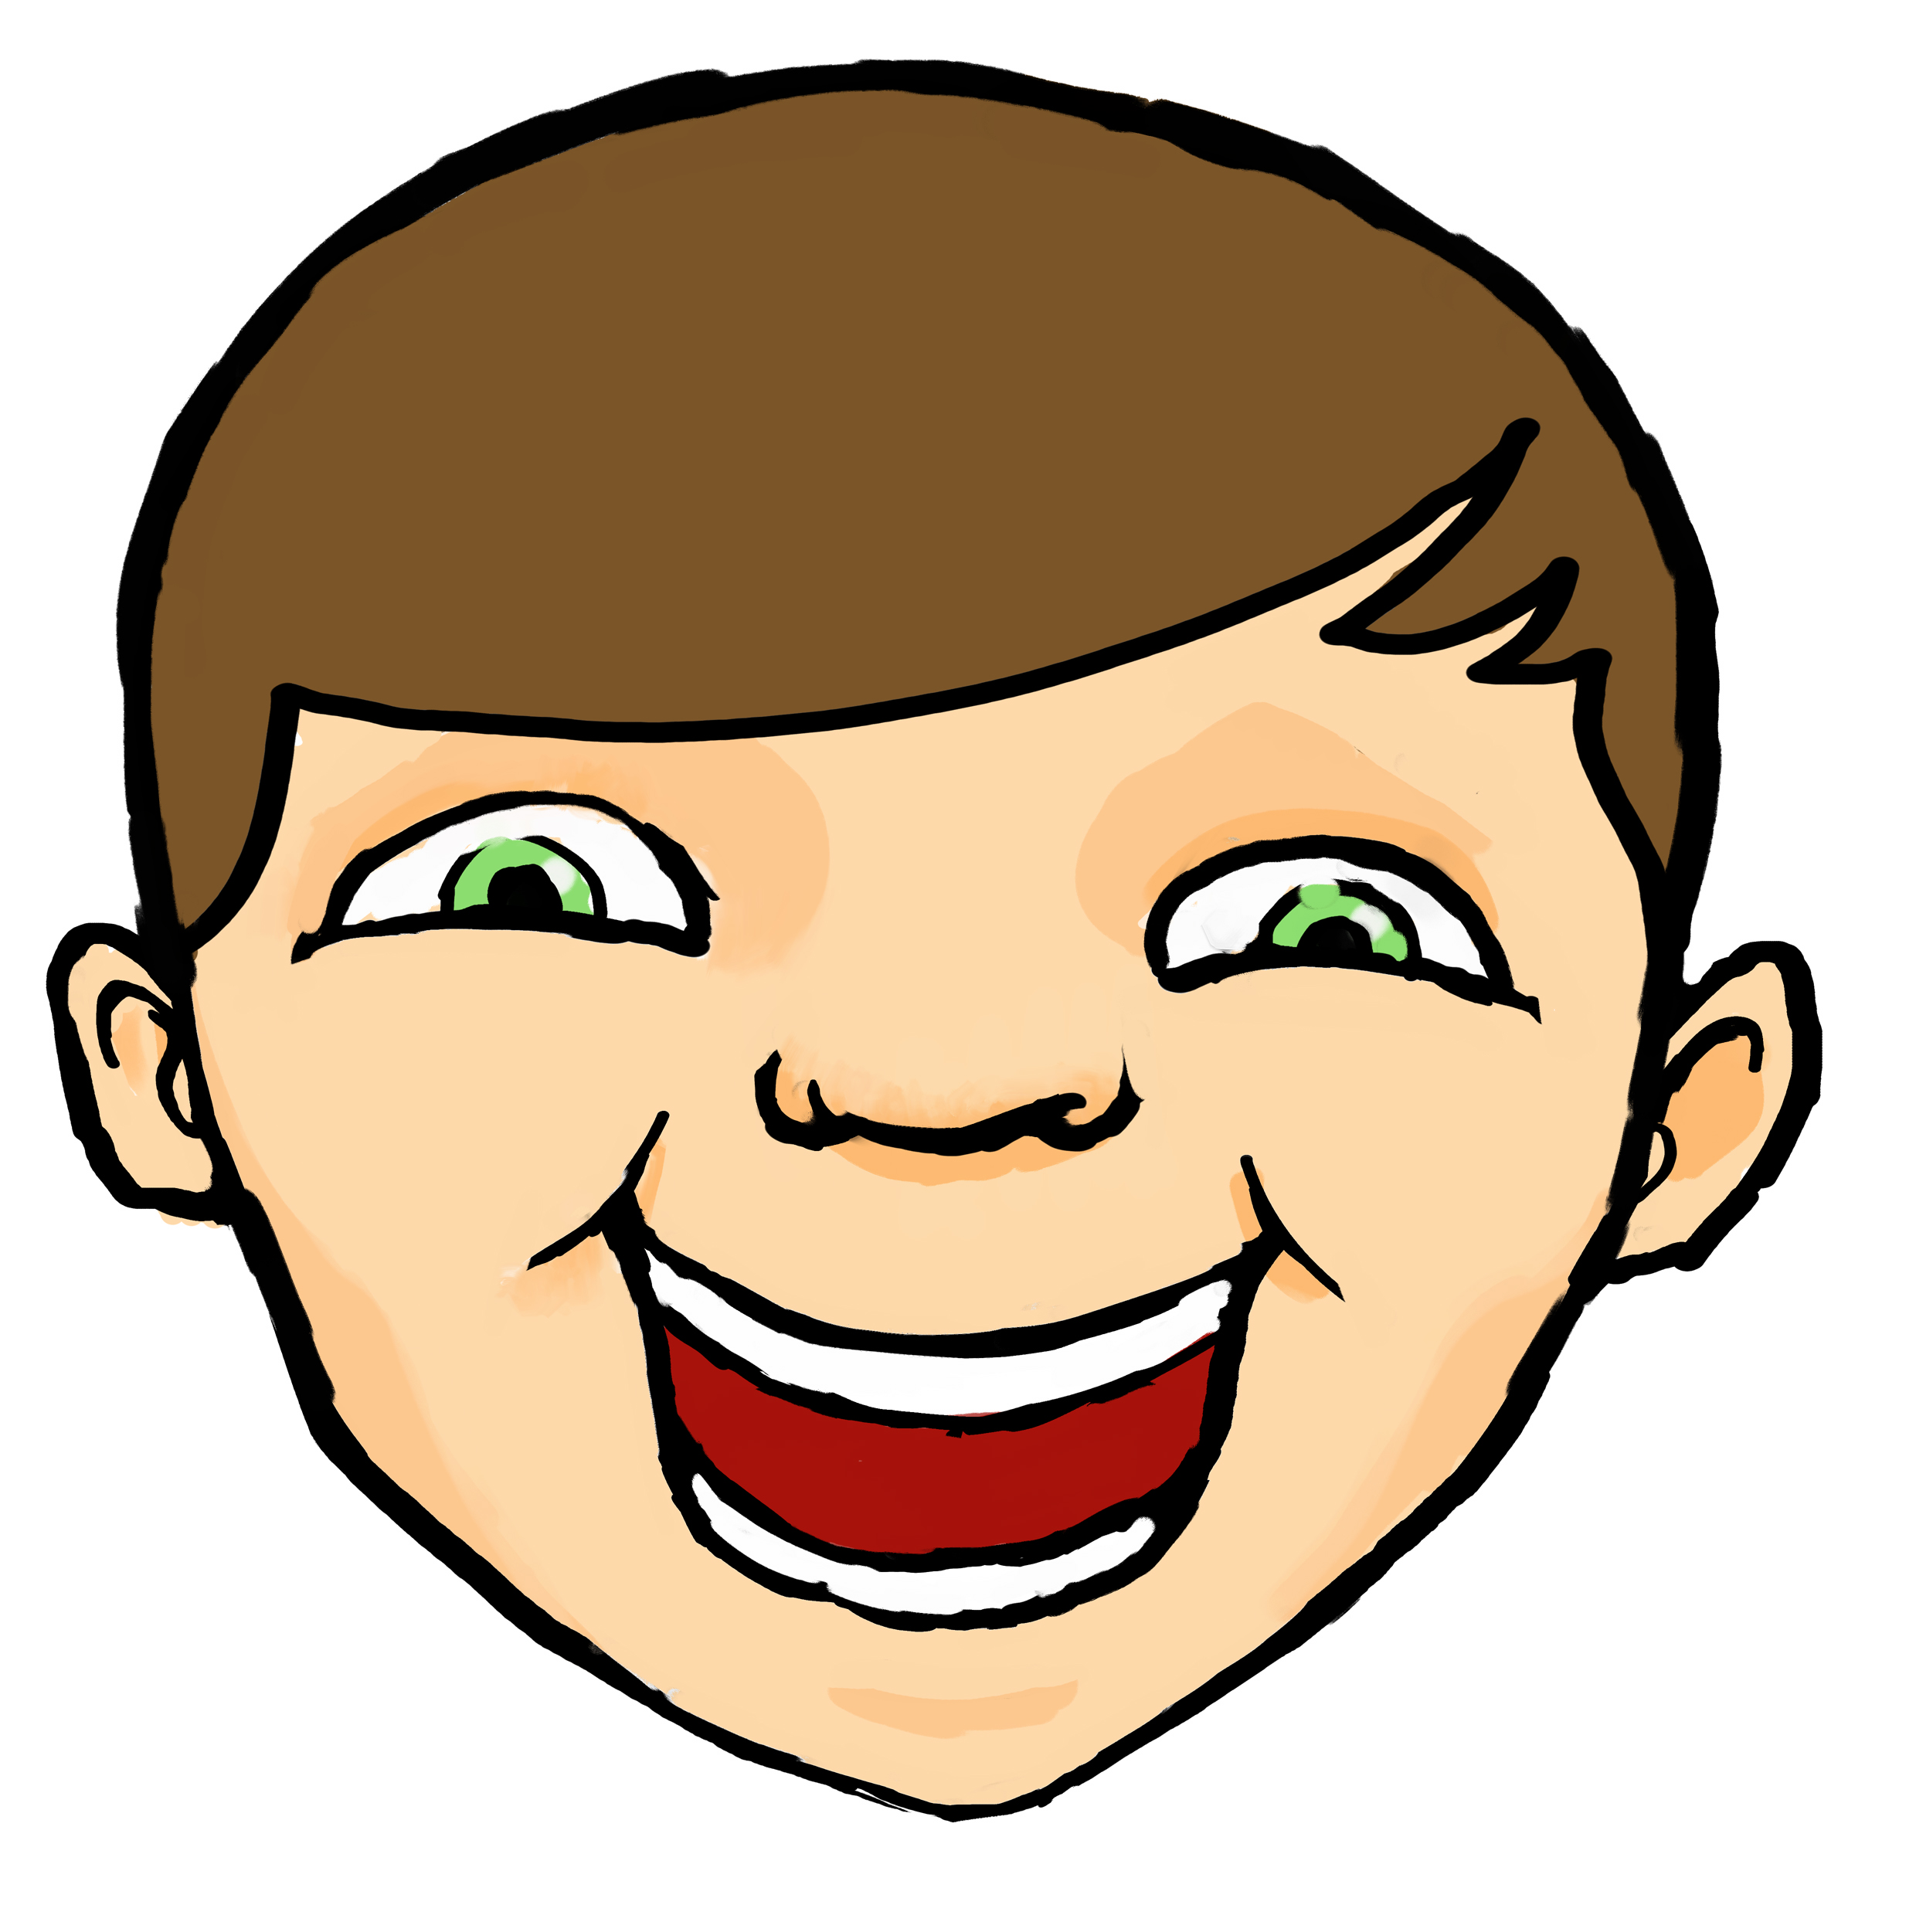 Laughing Face Clip Art